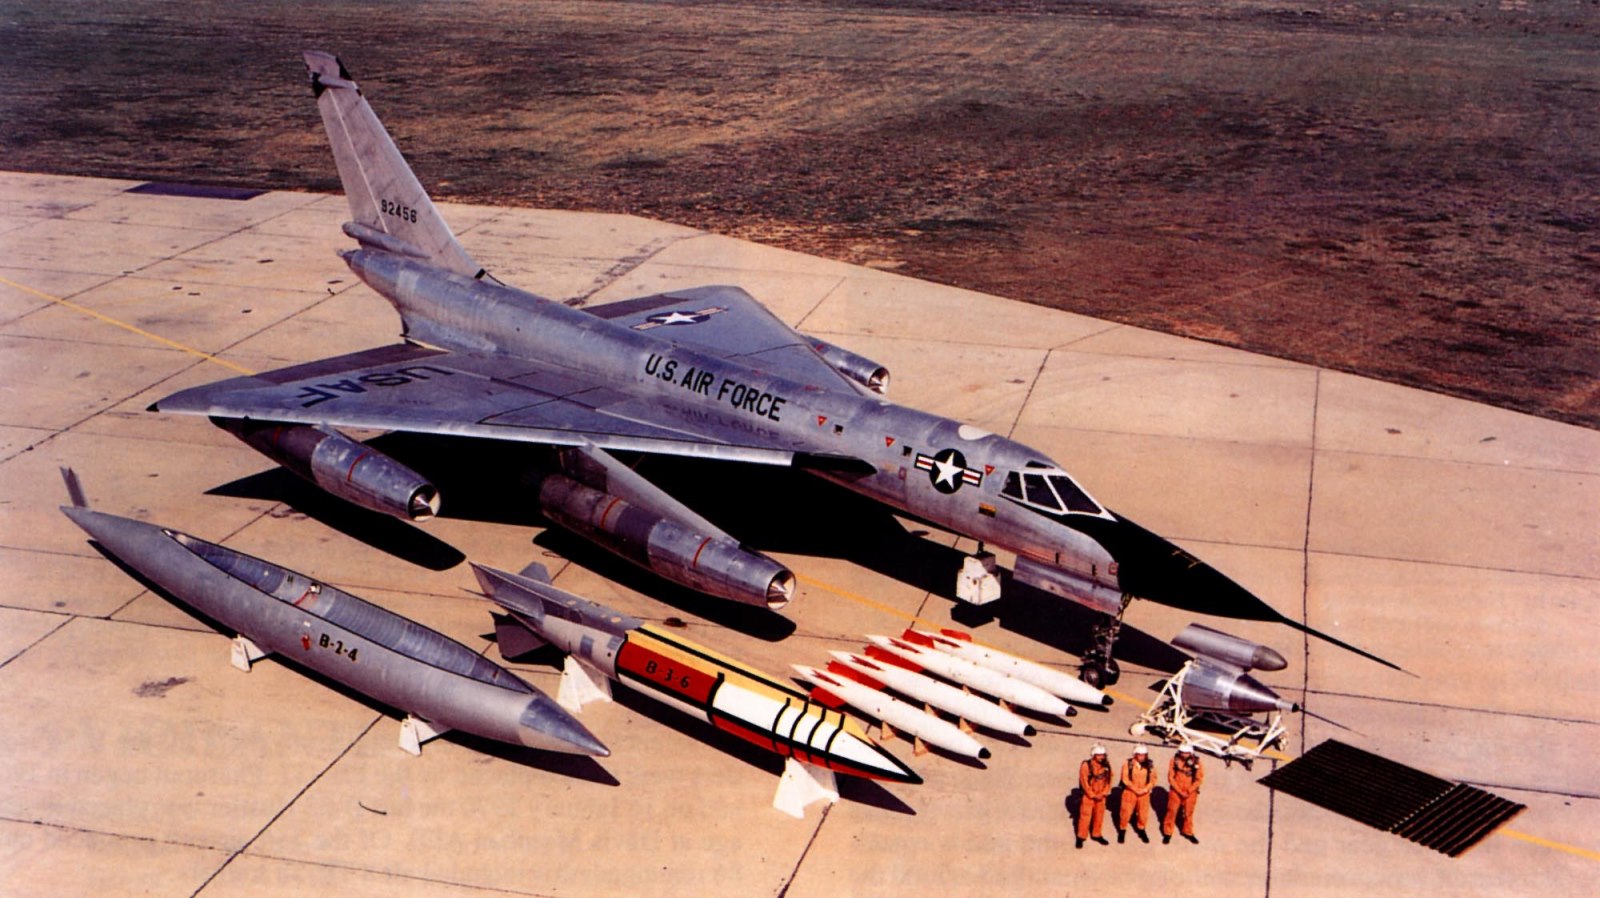 B-58 Hustlers pictured with crew and munitions.